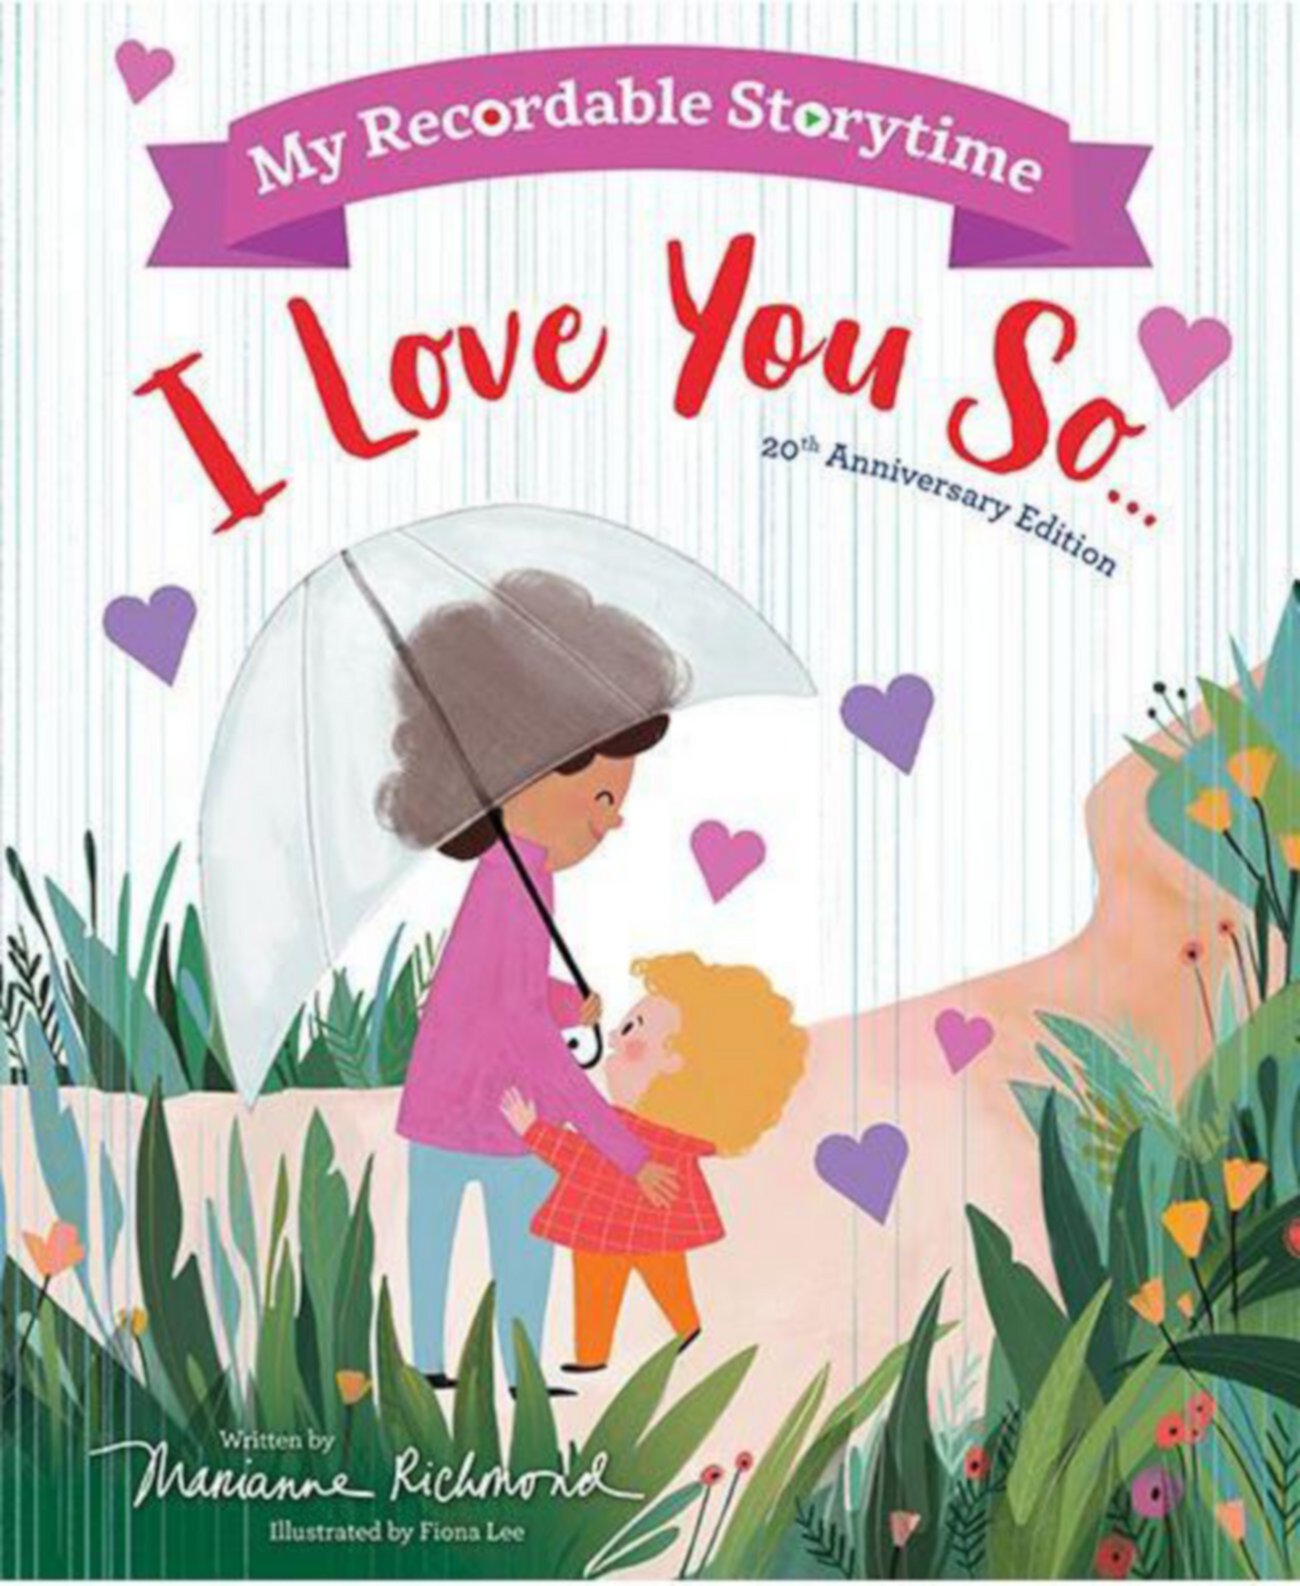 My Recordable Storytime- I Love You So by Marianne Richmond Barnes & Noble